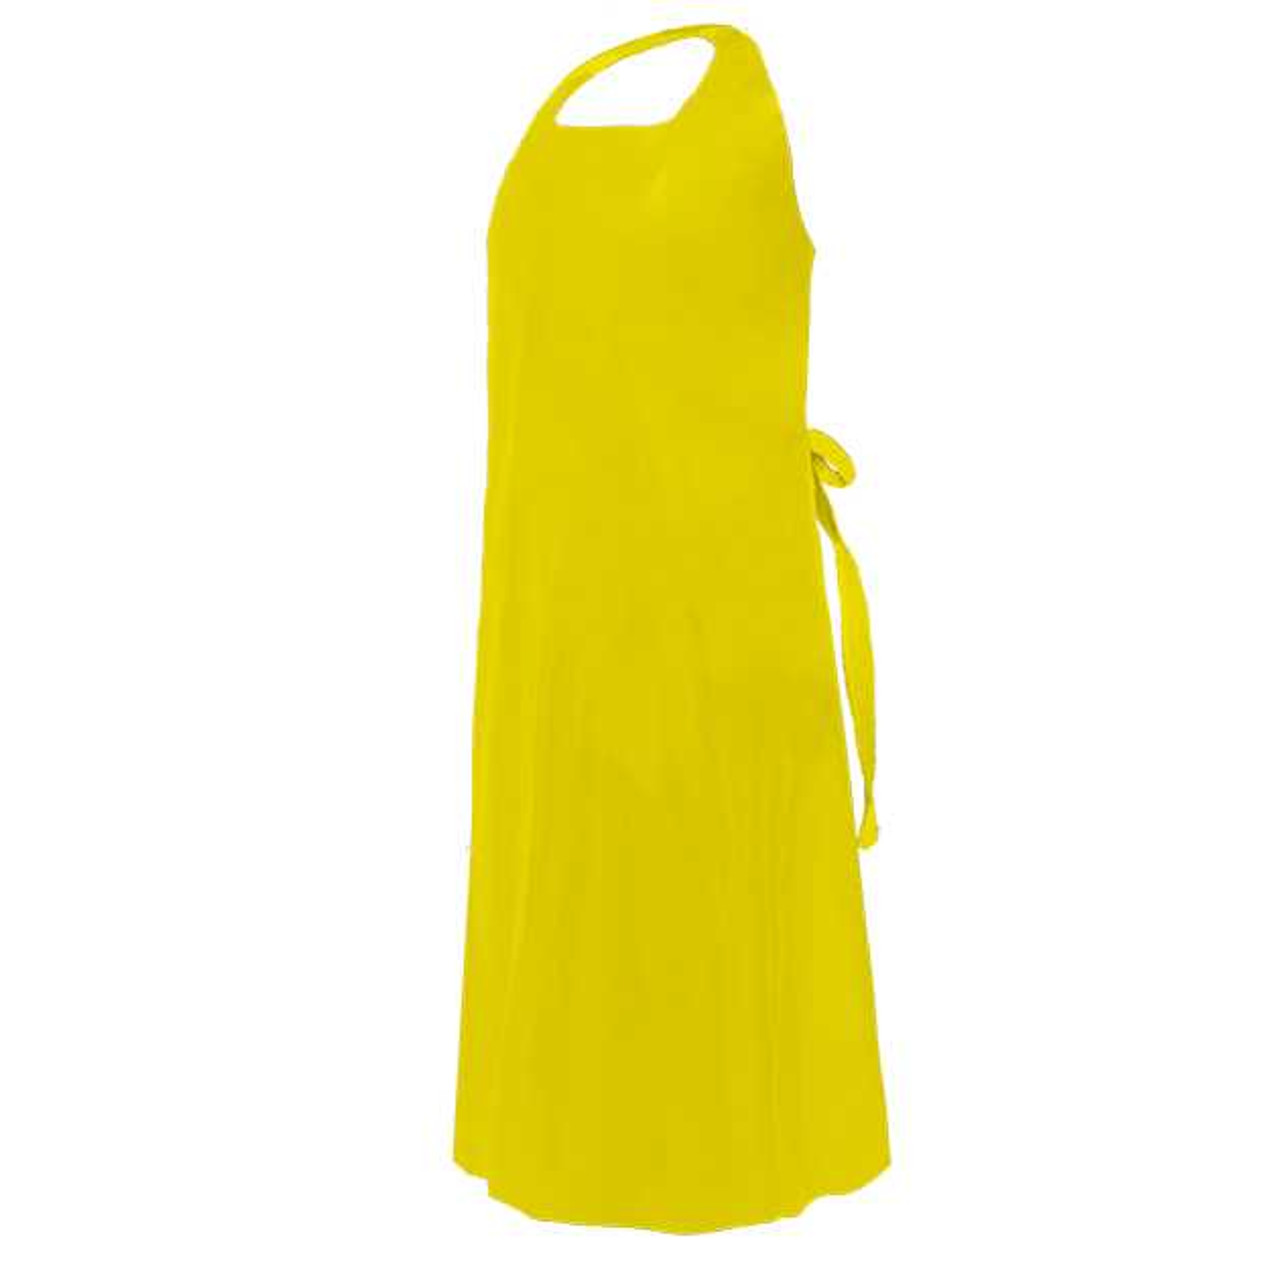 CoverMe™ Polyurethane Die Cut Apron - 5.5 mil, Available in White, Blue, or Yellow (24 aprons / case)